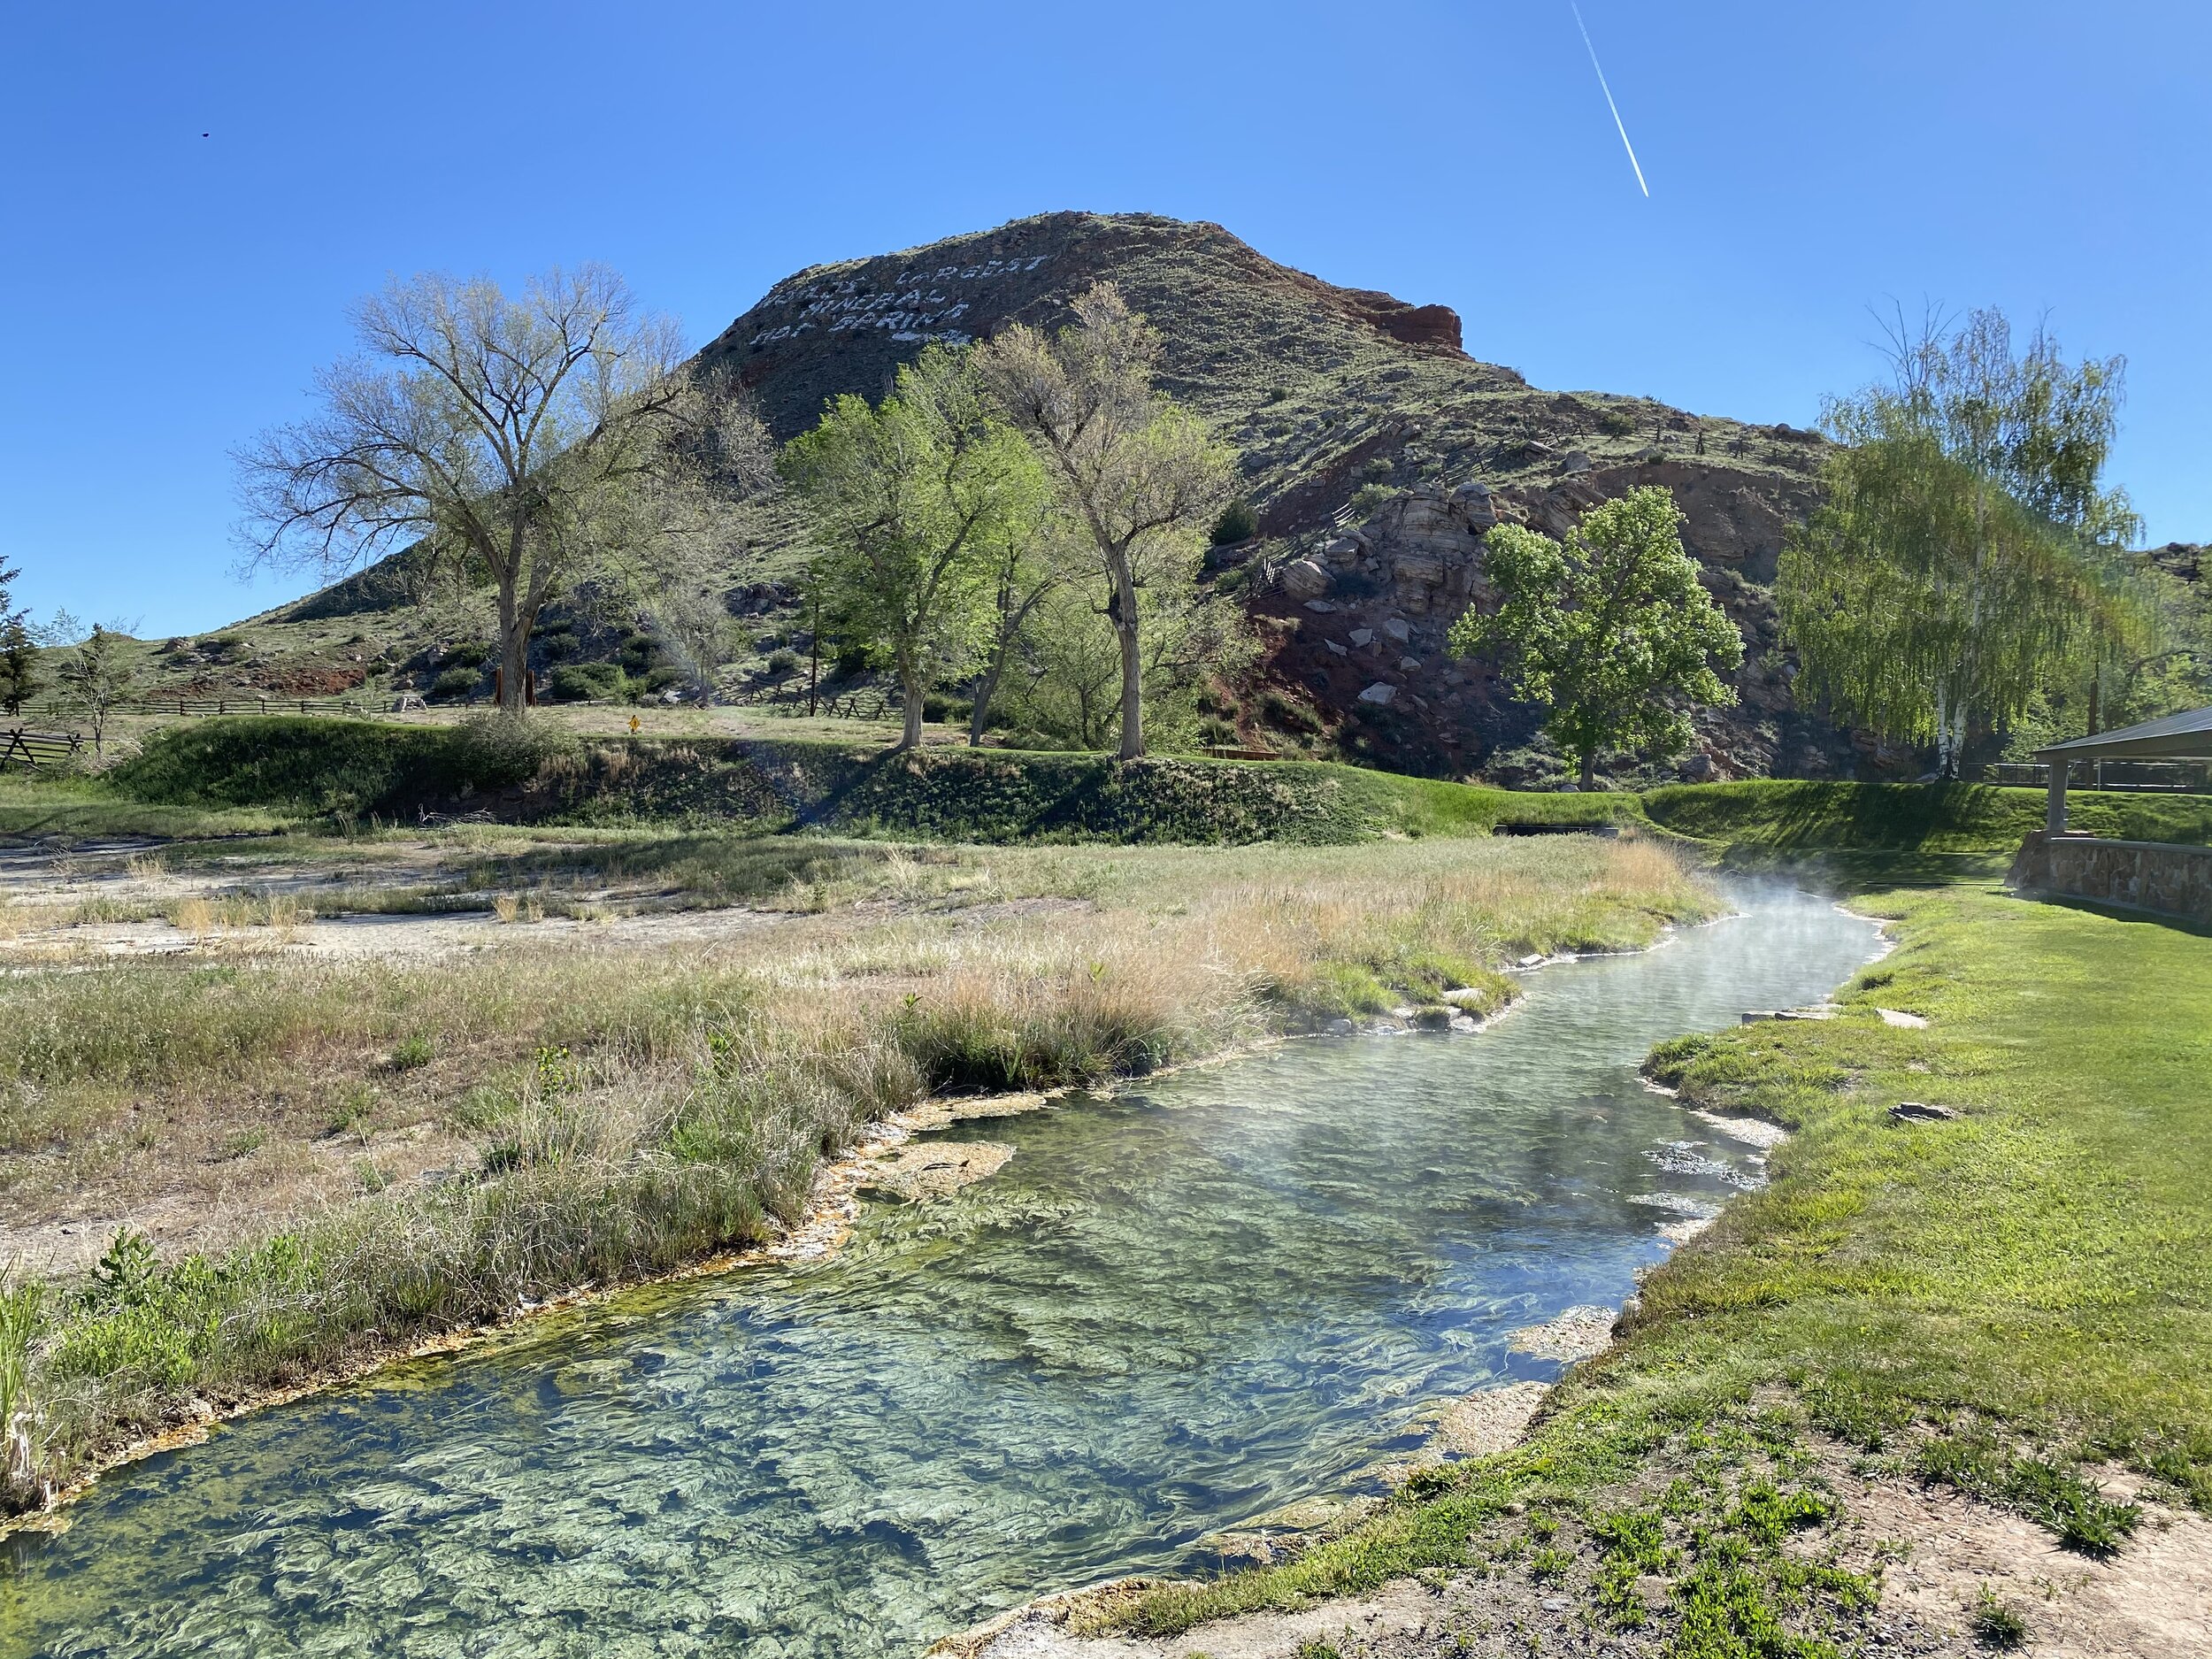 Walking around Hot Springs State Park, Thermopolis, WY.  Photo By Karen Boudreaux, May 29, 2021